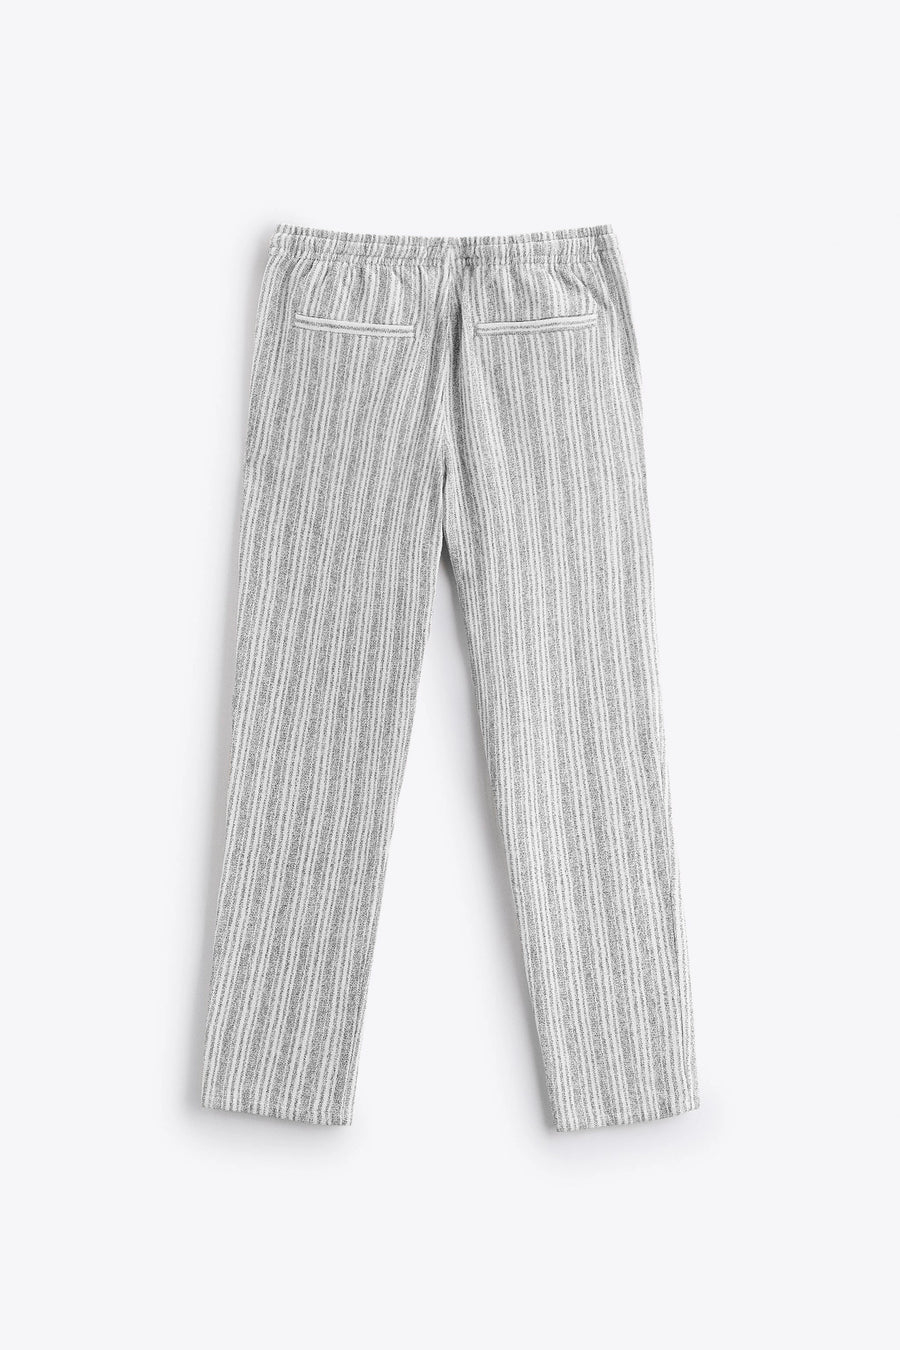 STRIPED TEXTURED TROUSERS